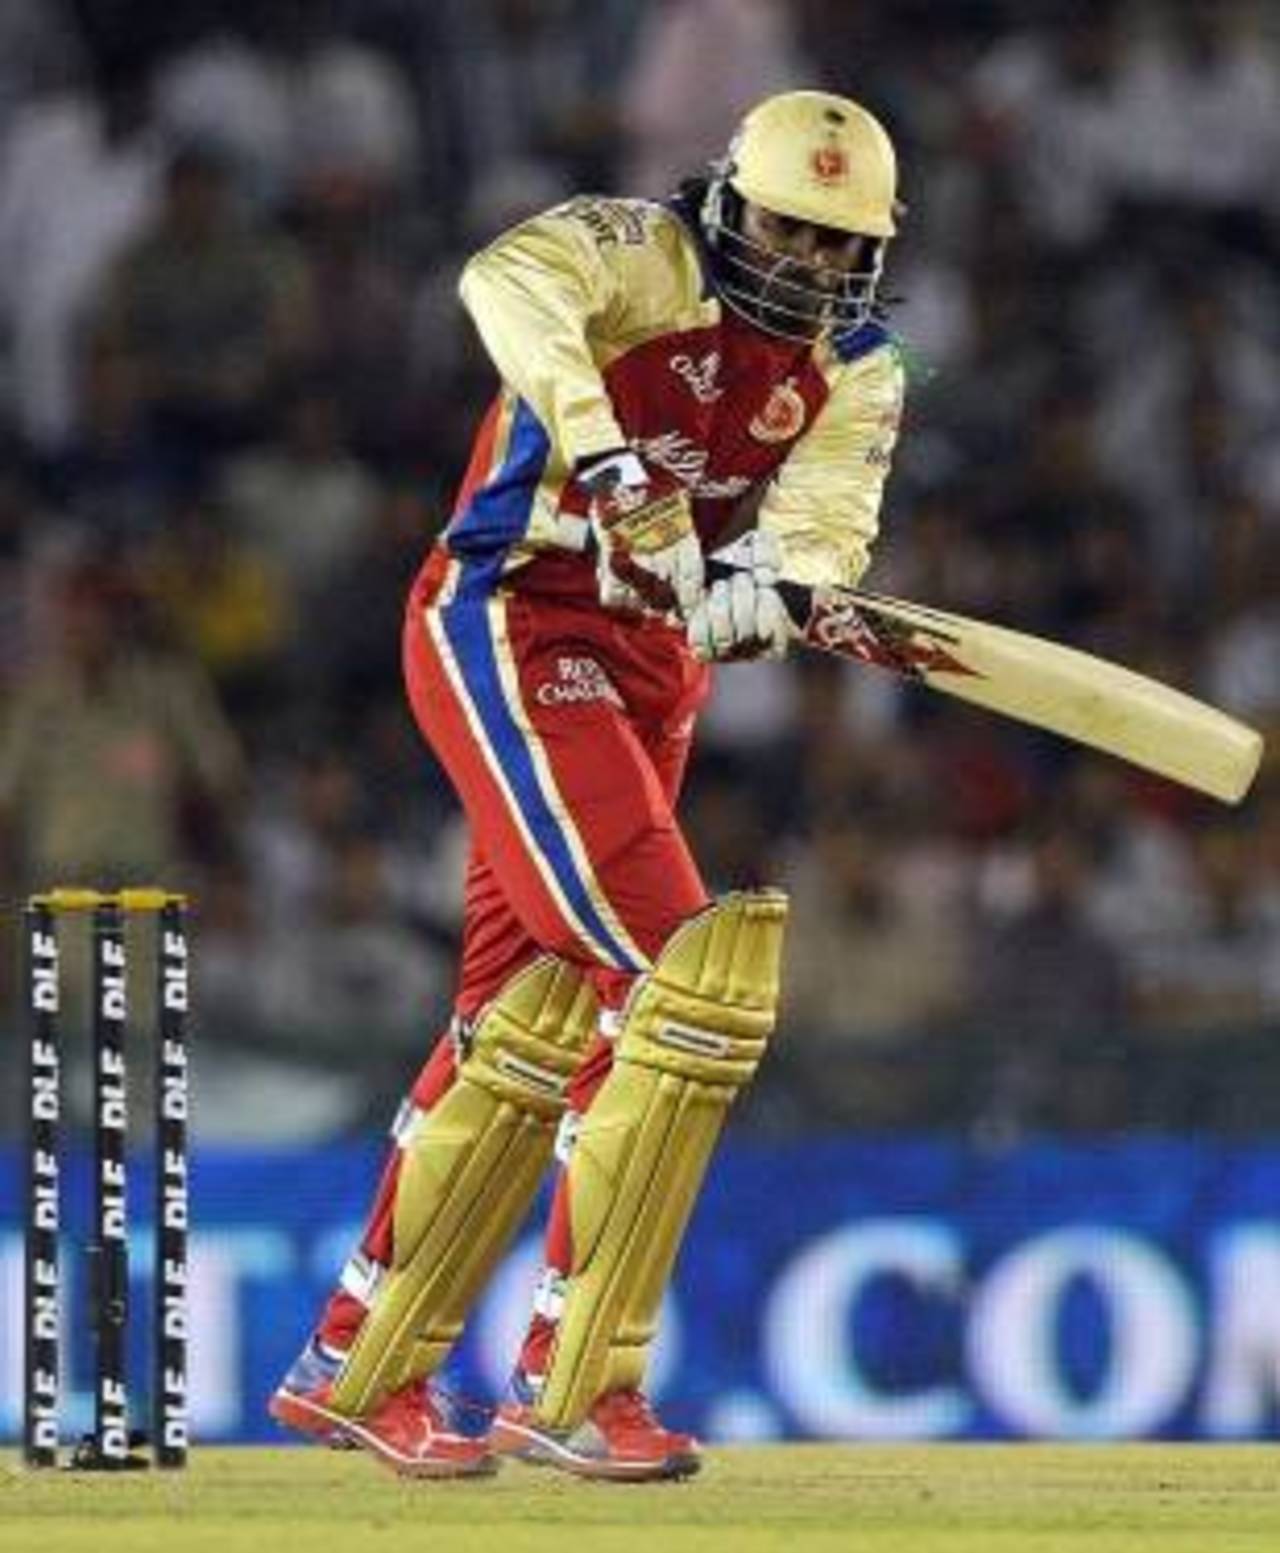 Chris Gayle is currently playing in the IPL for Royal Challengers Bangalore but will return to West Indies colours for the one-day series in England&nbsp;&nbsp;&bull;&nbsp;&nbsp;AFP